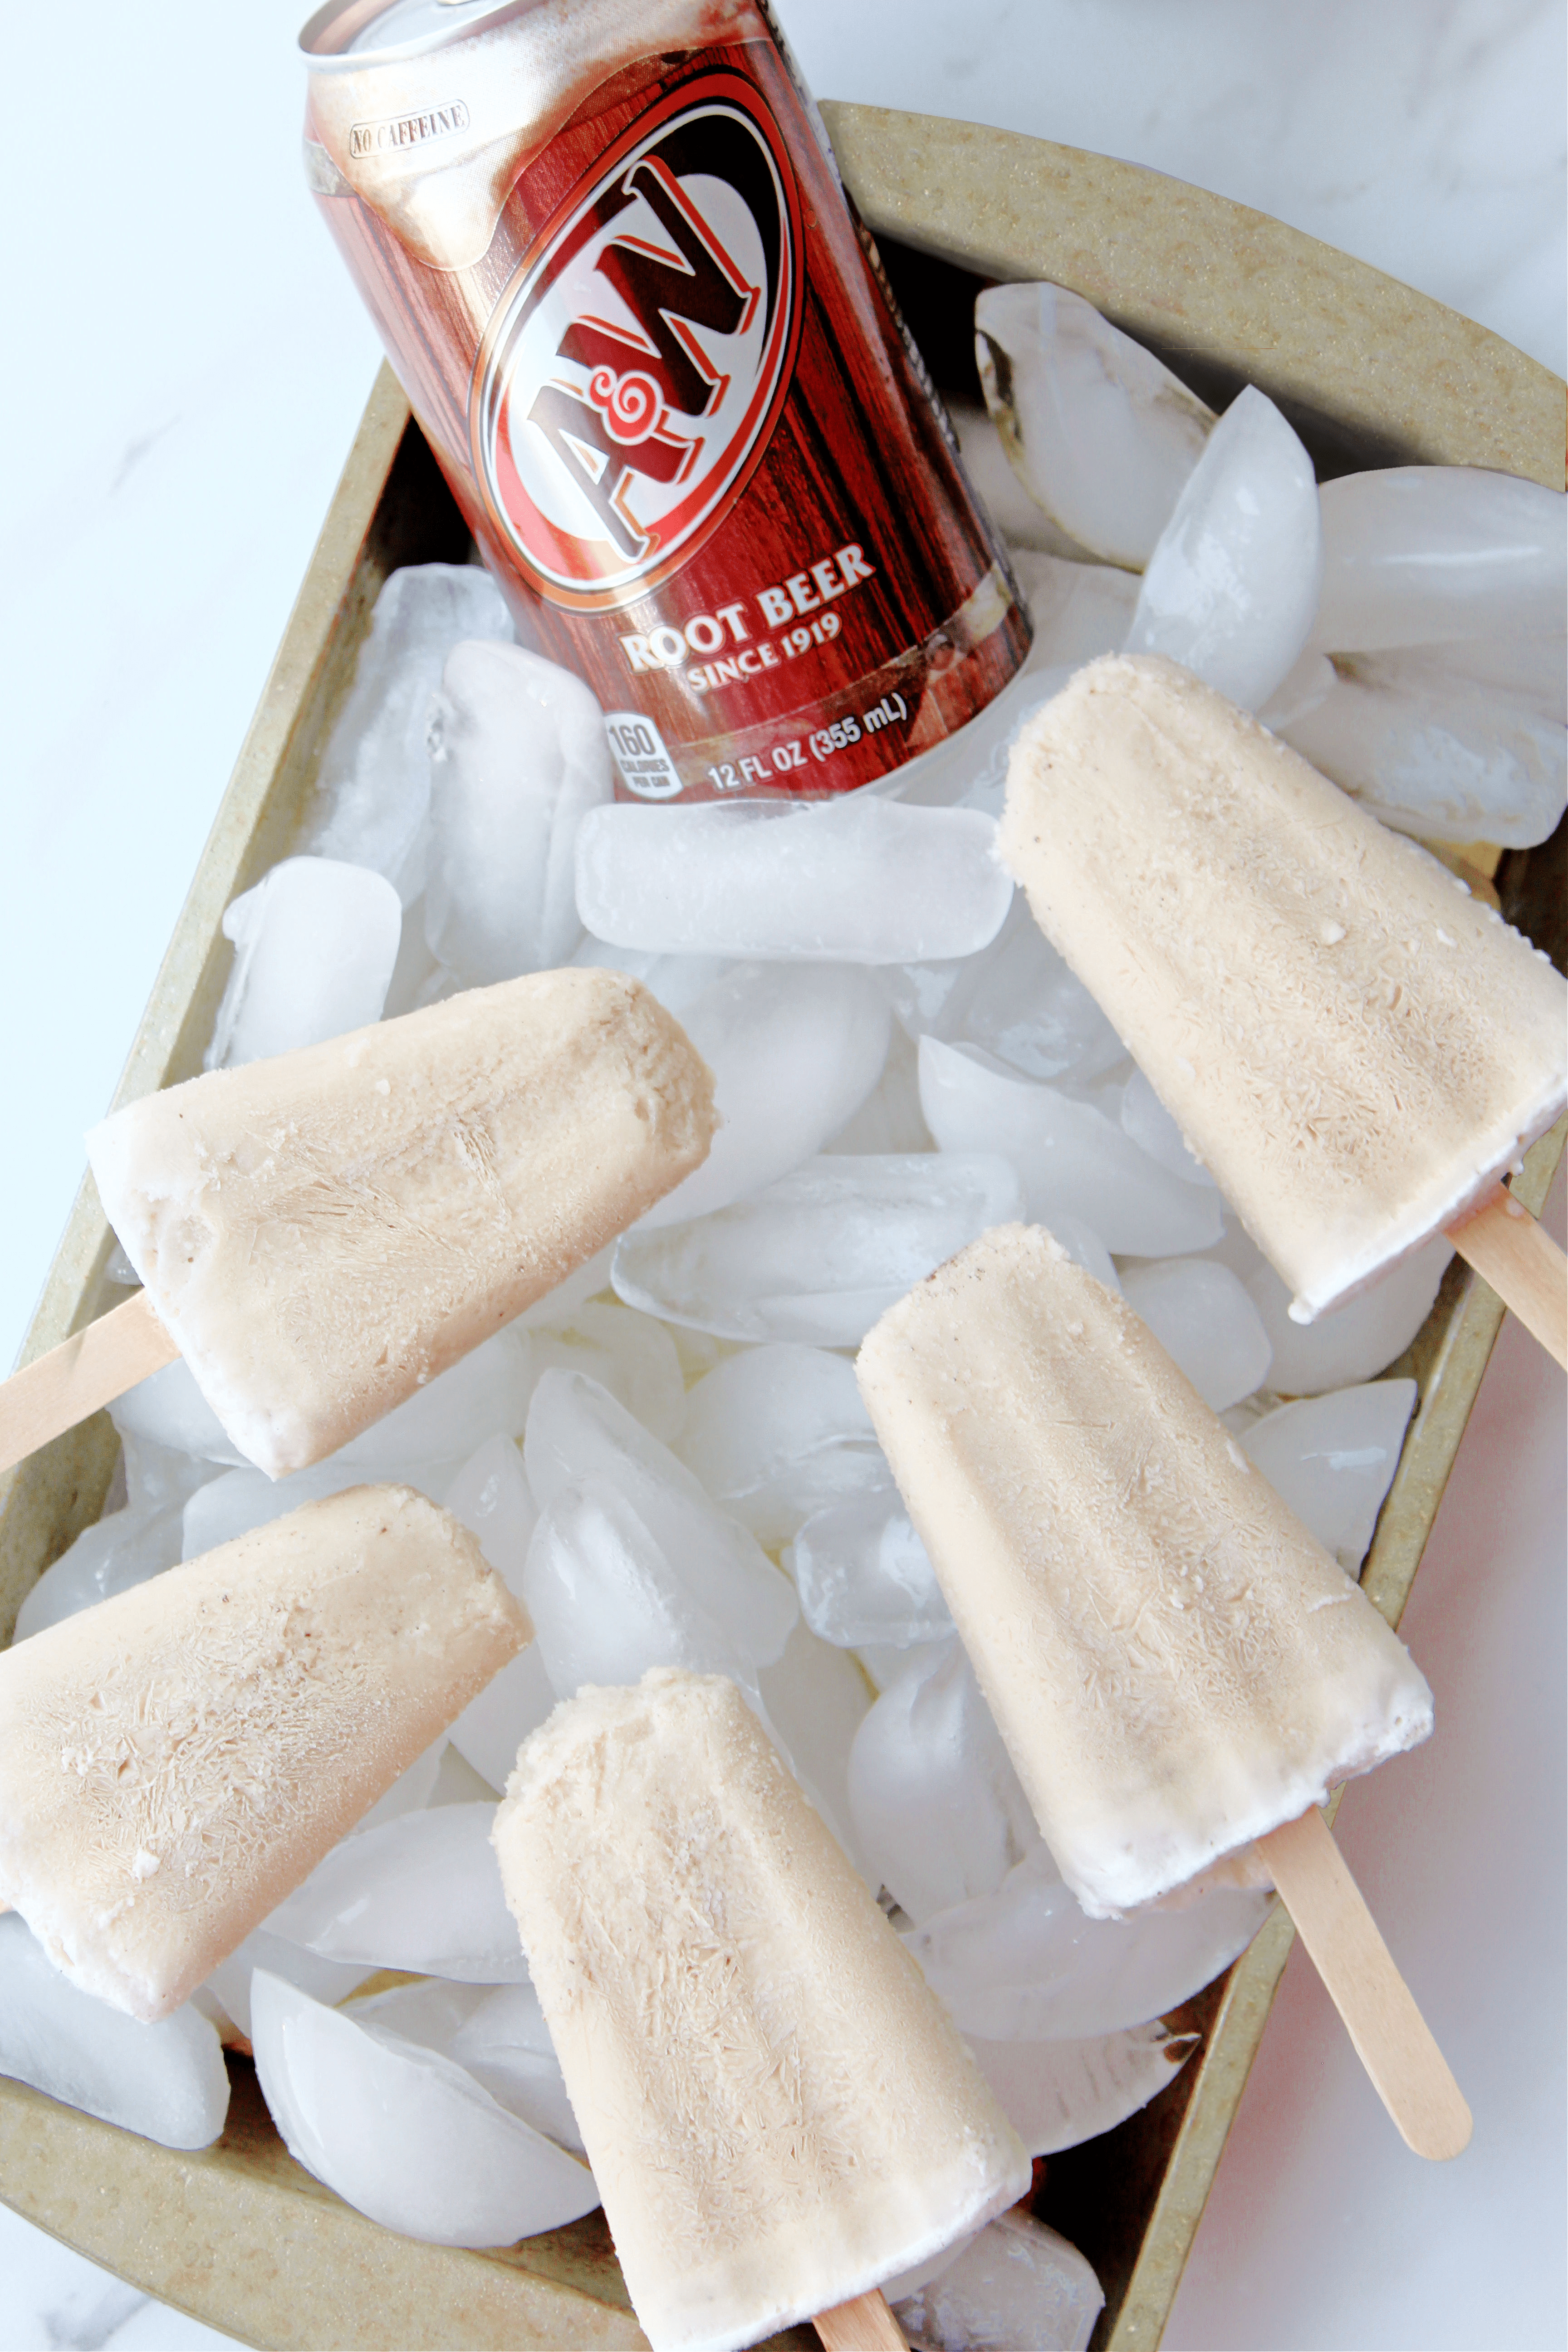 root beer popsicles on baking sheet lined with ice